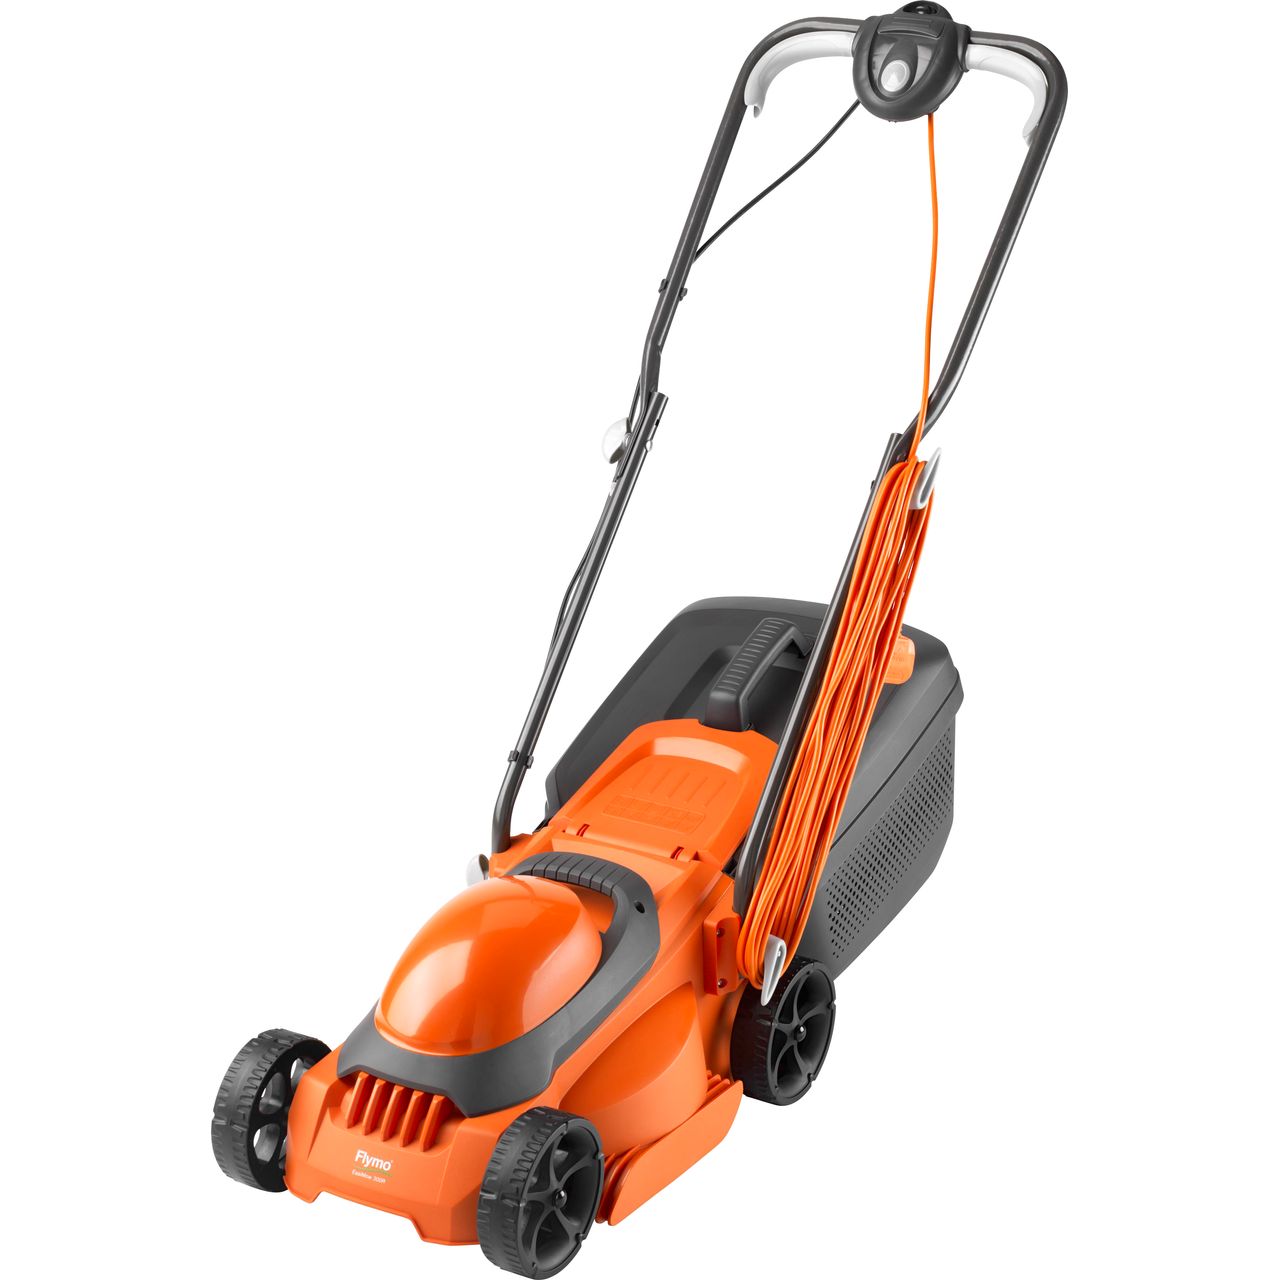 Flymo EasiMow 300R Electric Lawnmower Review